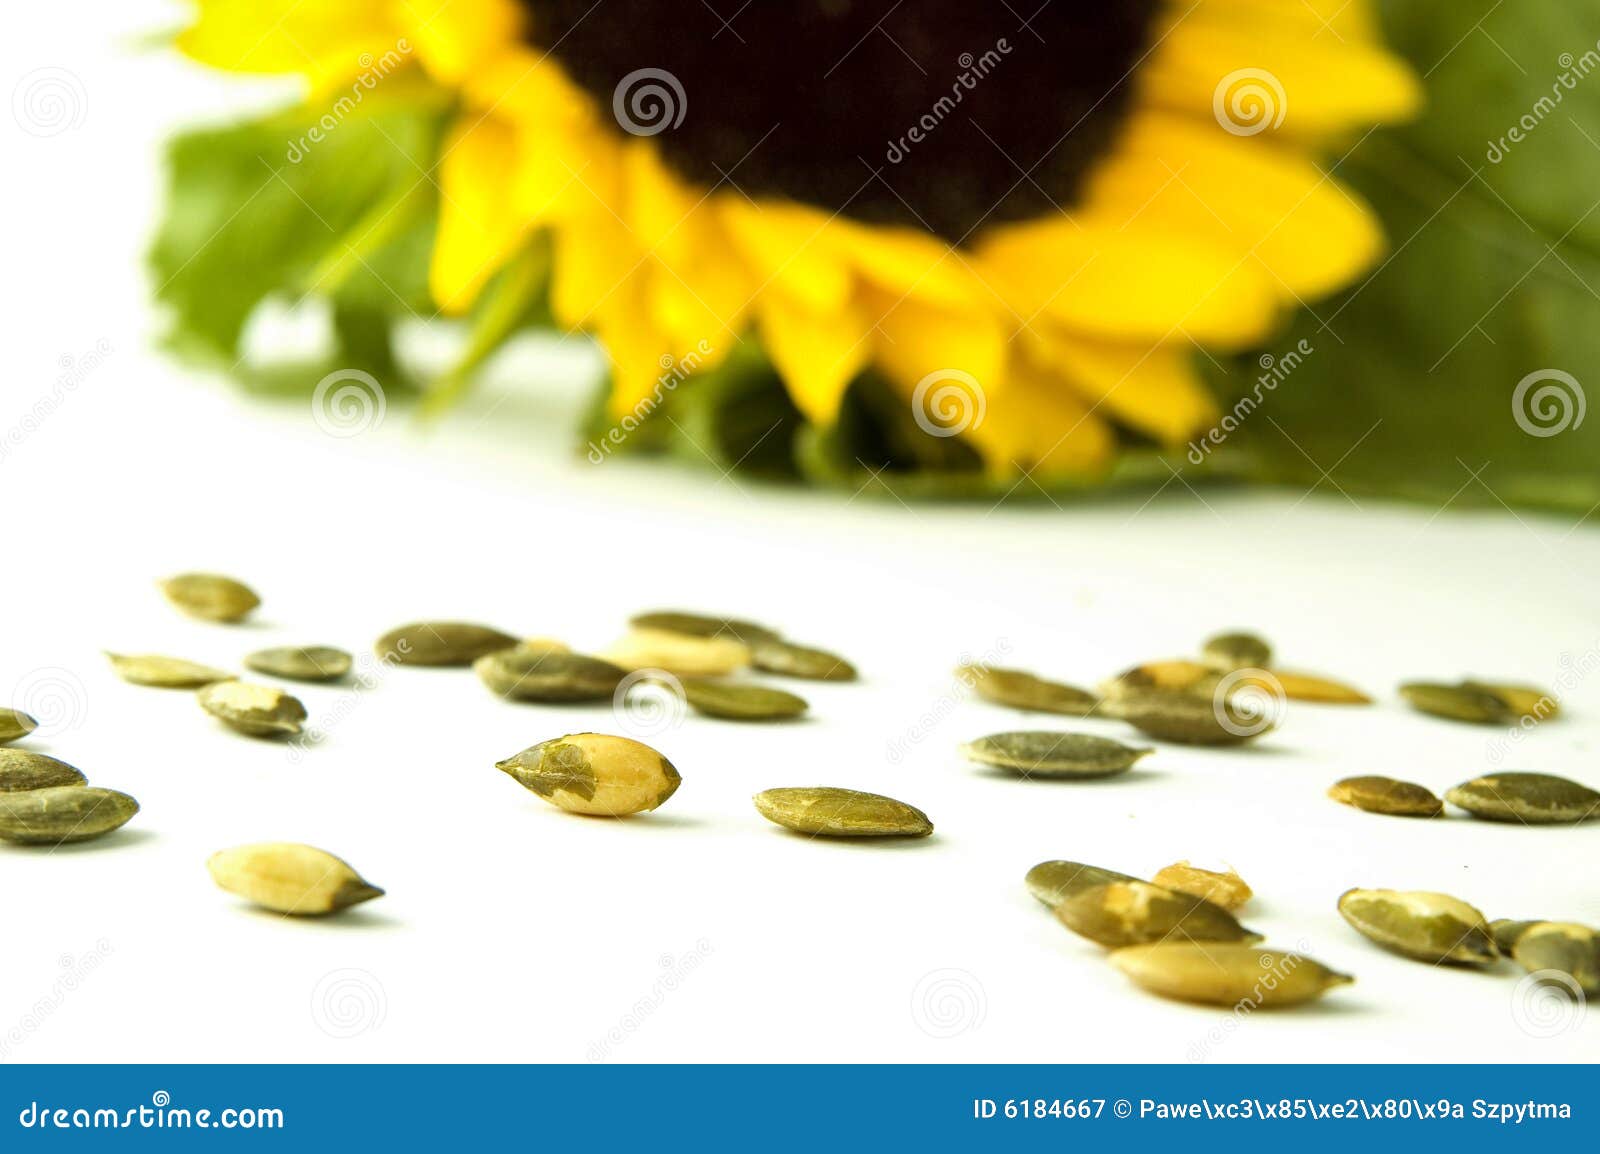 Sunflower with seed stock image. Image of blue, daises - 6184667